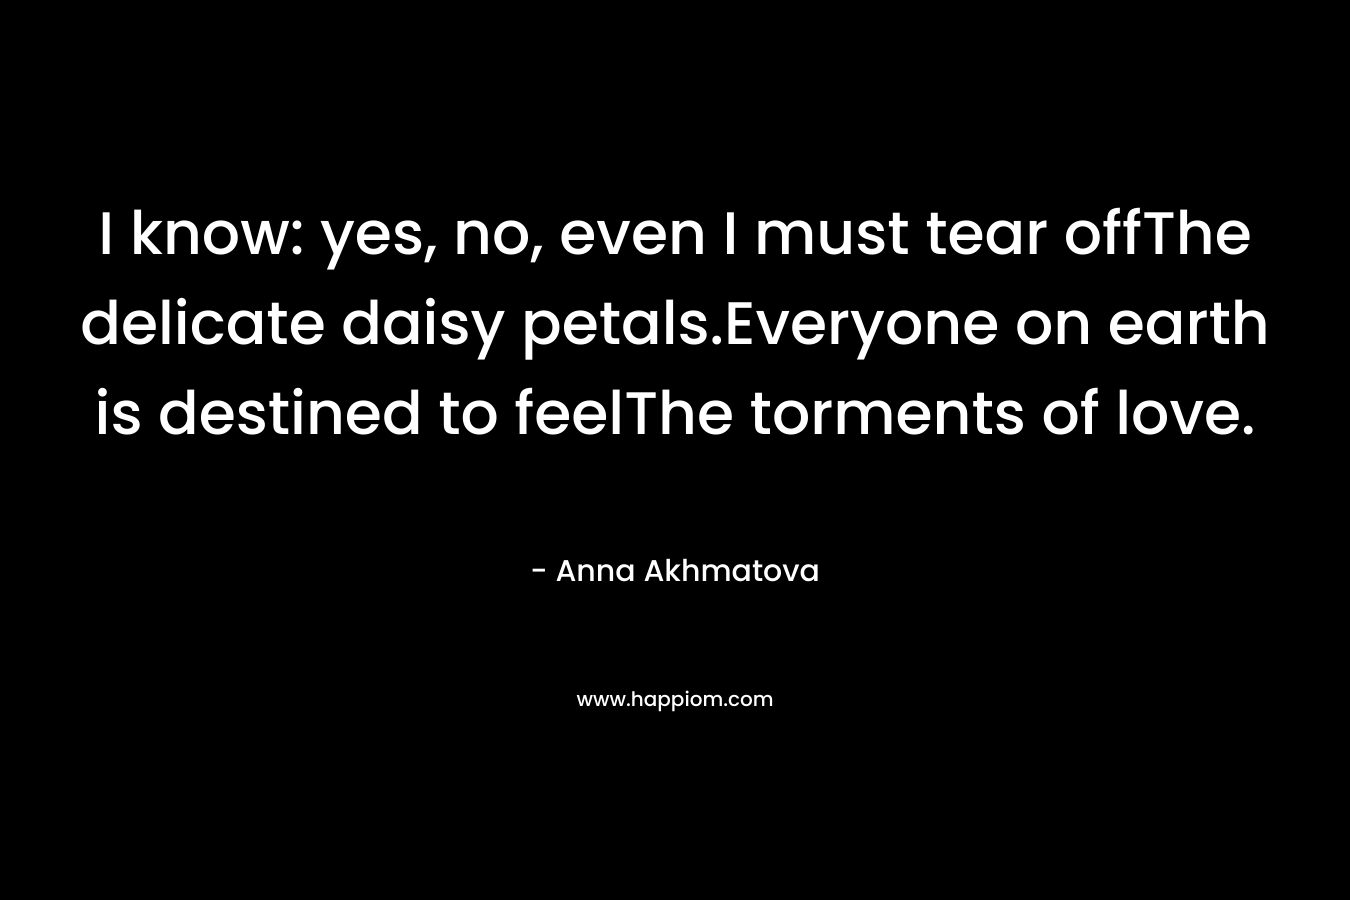 I know: yes, no, even I must tear offThe delicate daisy petals.Everyone on earth is destined to feelThe torments of love. – Anna Akhmatova